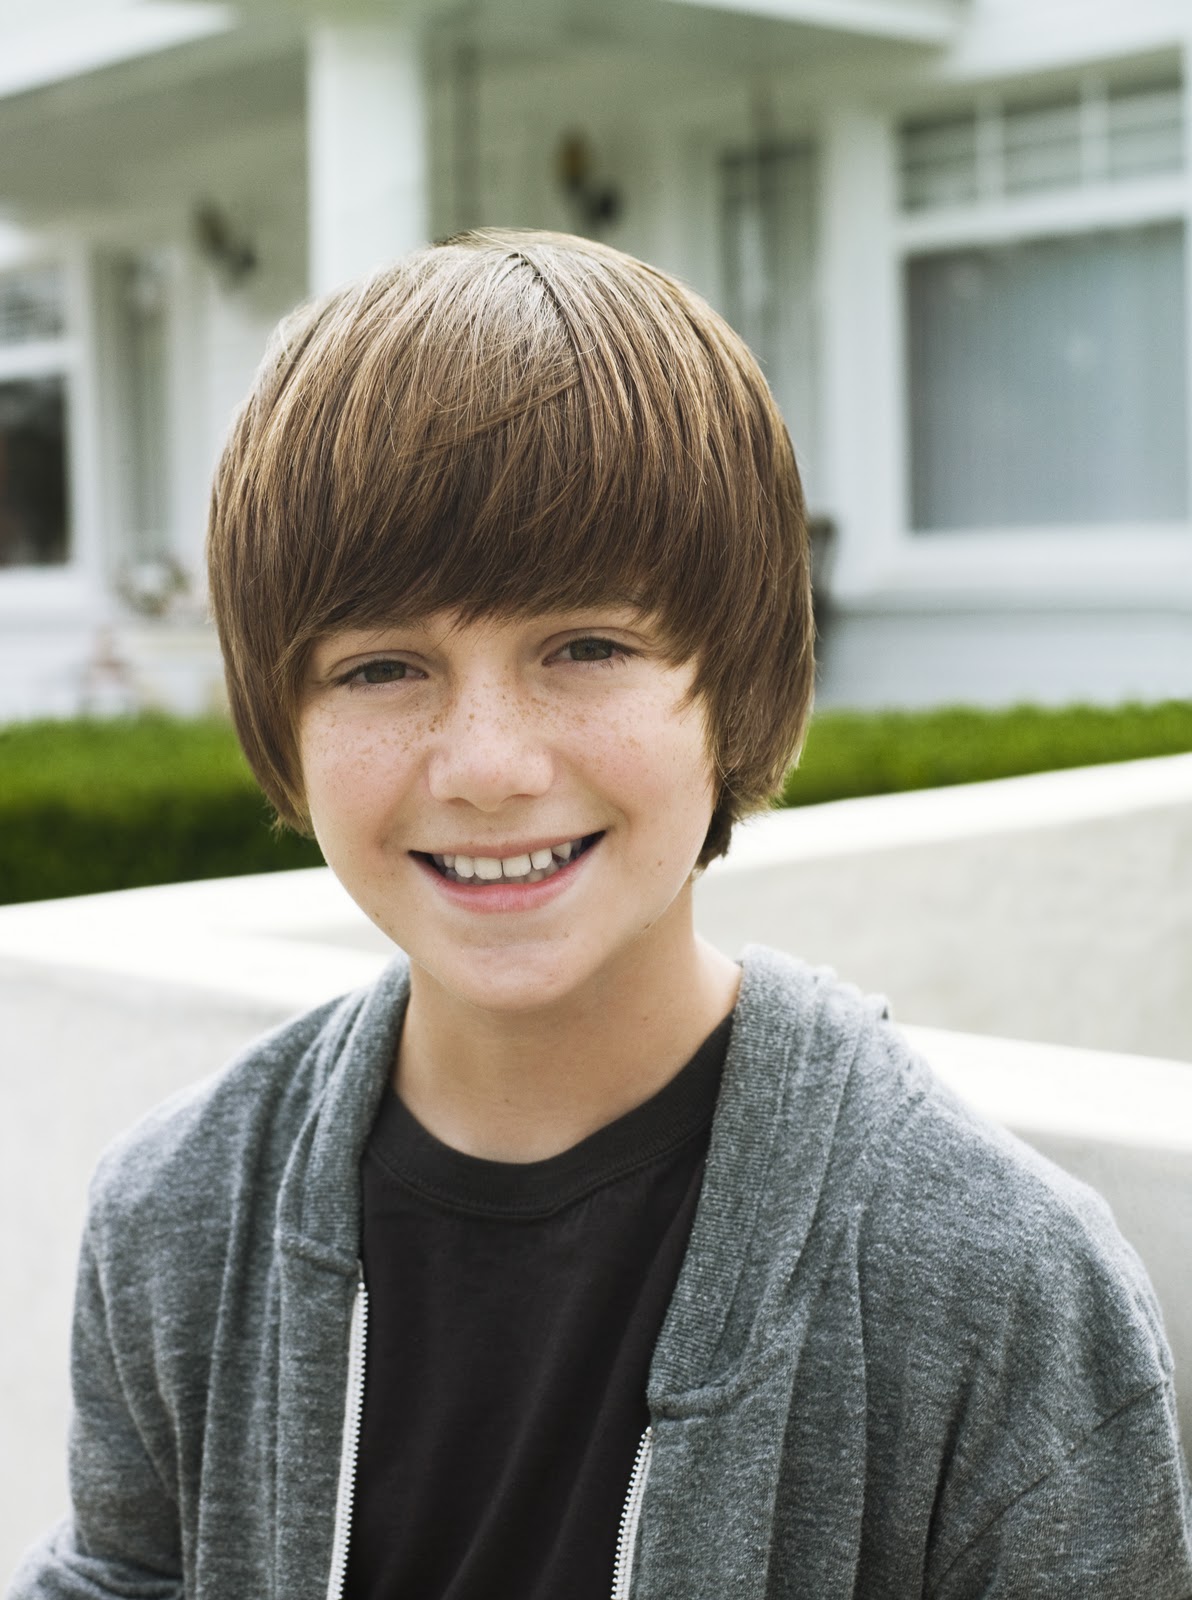 greyson chance 37 | greyson chance images wallpapers | imagesbee.com